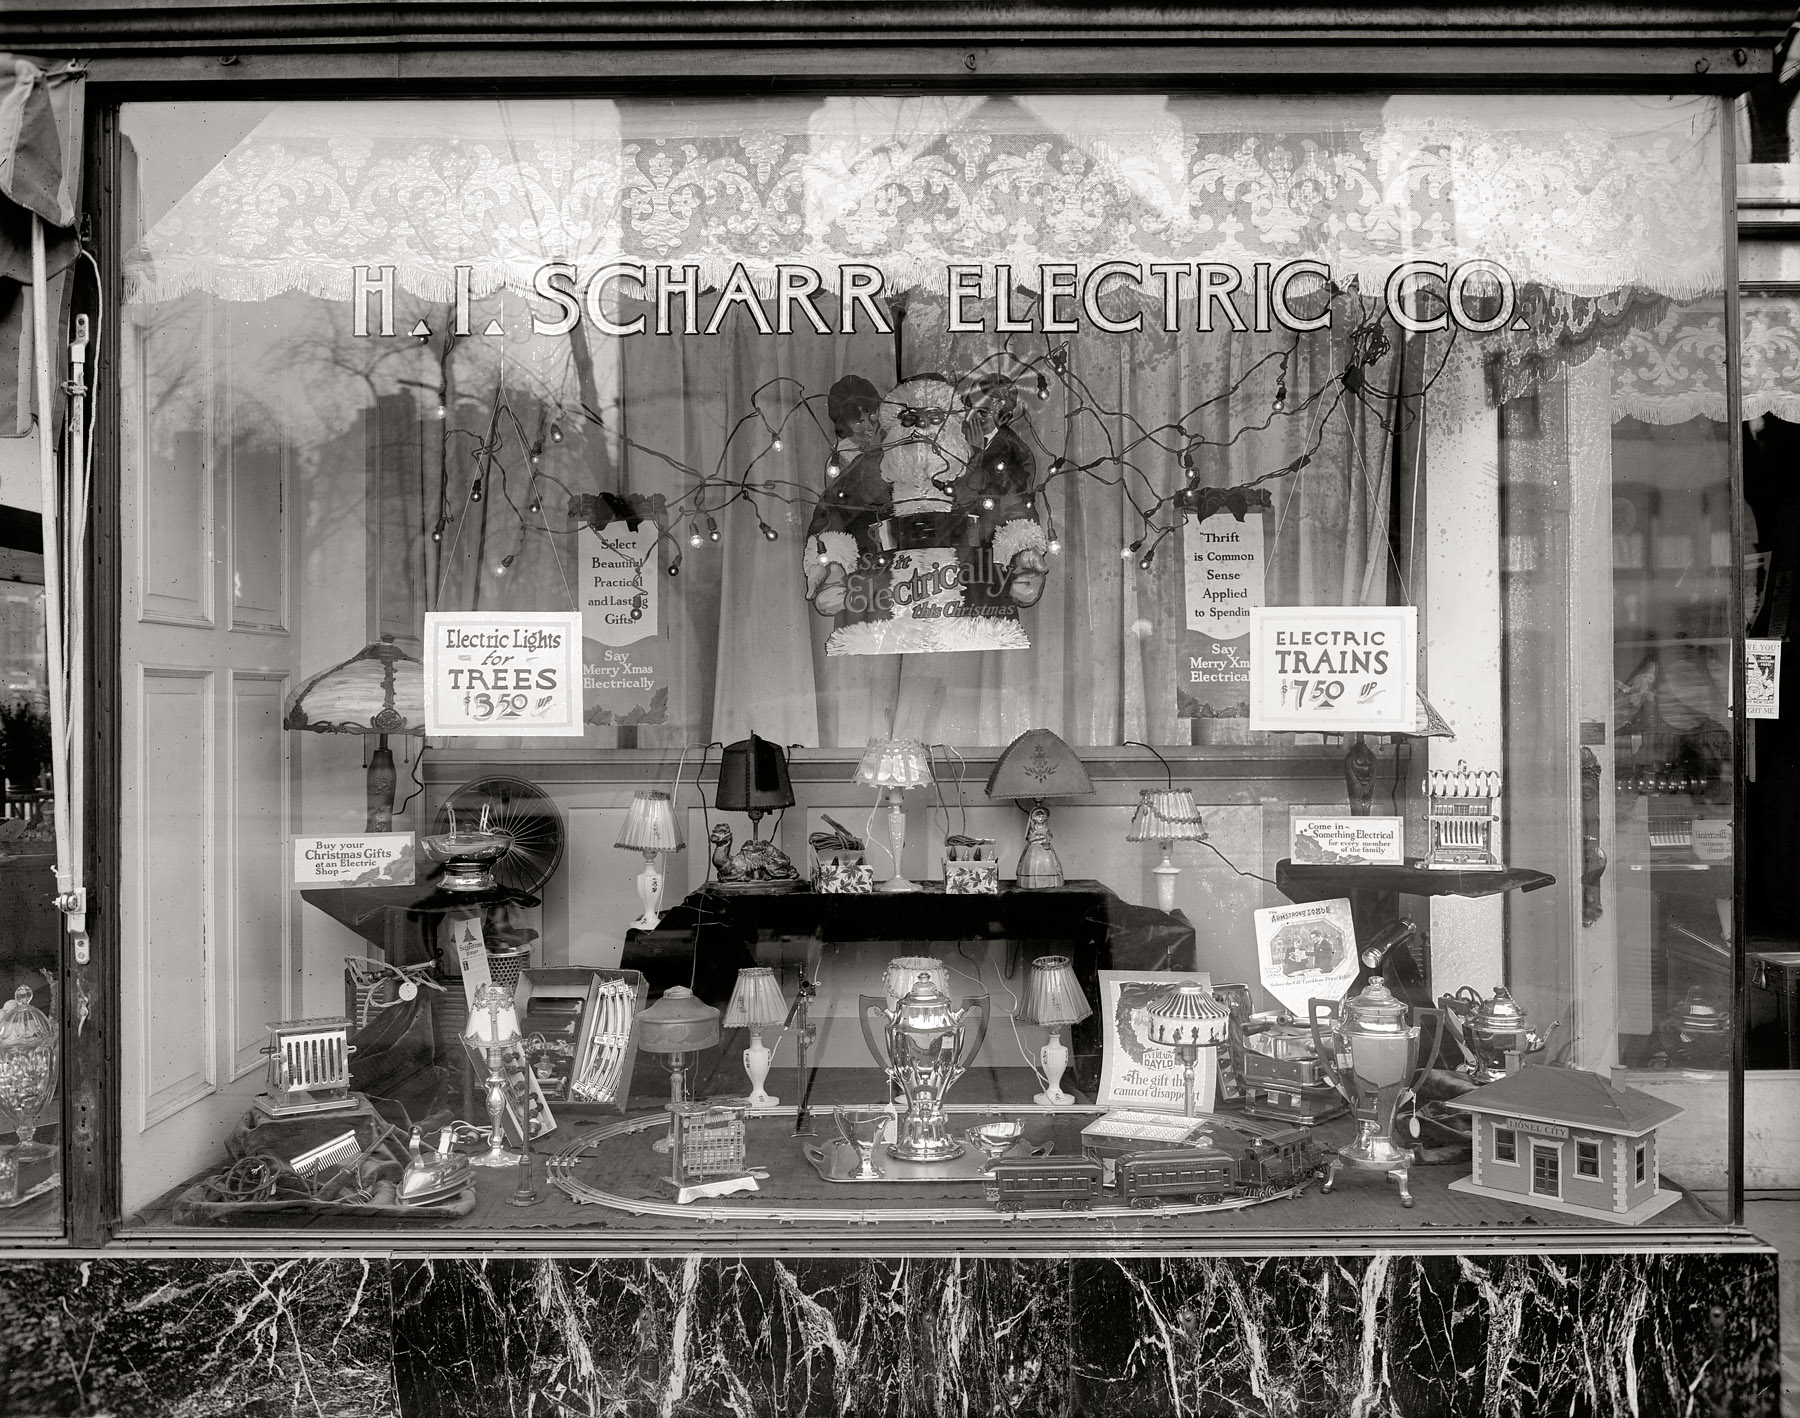 Washington, D.C., circa 1921. "H.I. Scharr Electric Co., front." Harry Scharr started out with a store at 711 13th Street N.W., then added a location at 739 11th Street. In 1927 he filed for bankruptcy. National Photo Co. View full size.